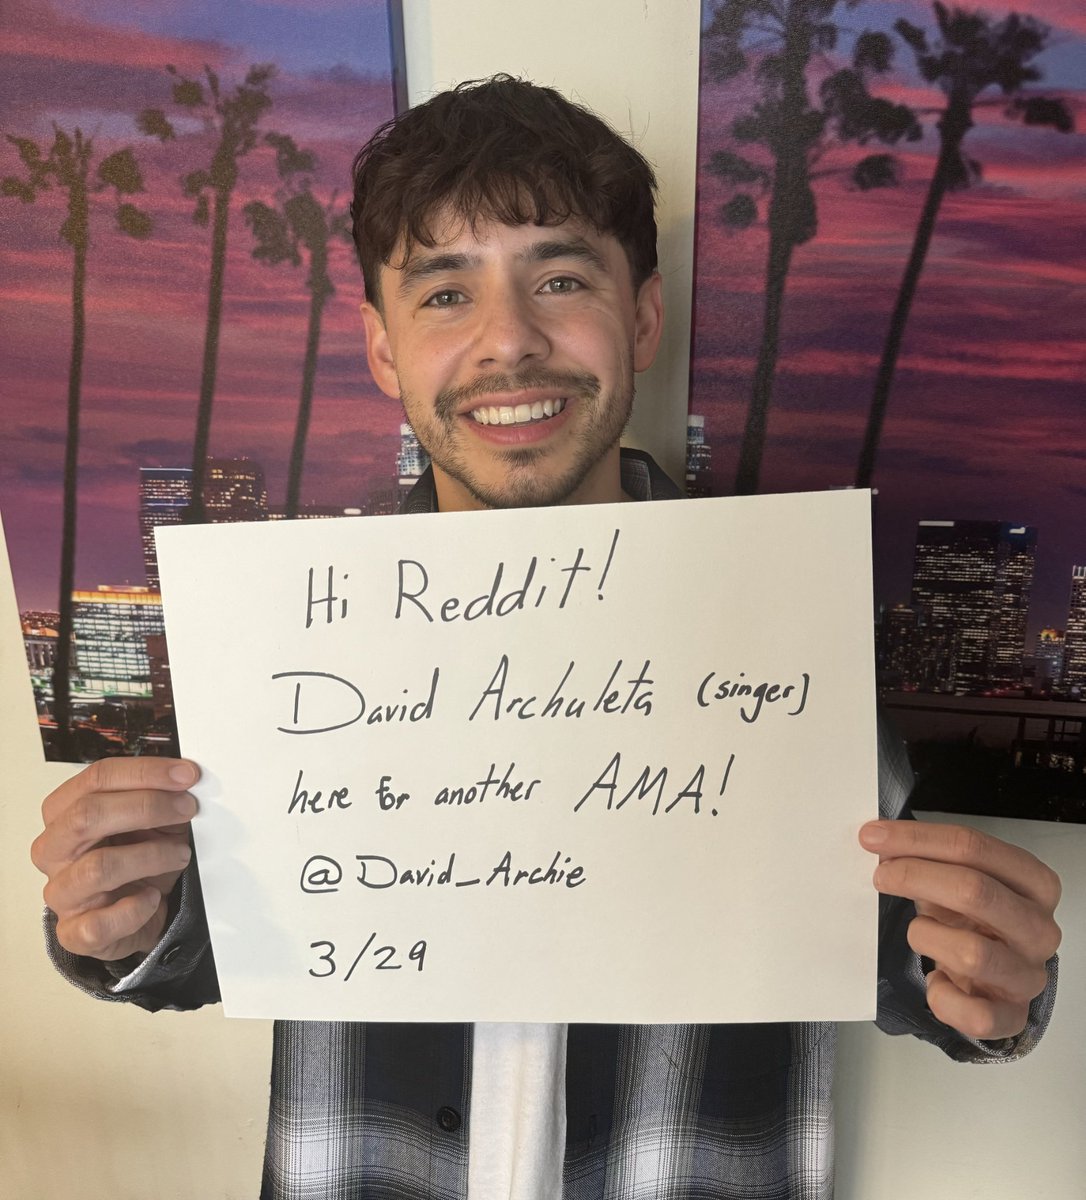 Heyyy We're excited to announce that @DavidArchie will be hosting an AMA with us this Friday, March 29th, at 10am PST/1pm EST. You can listen to his new single 'Hell Together' tomorrow just in time to ask him about it. We'll see you the